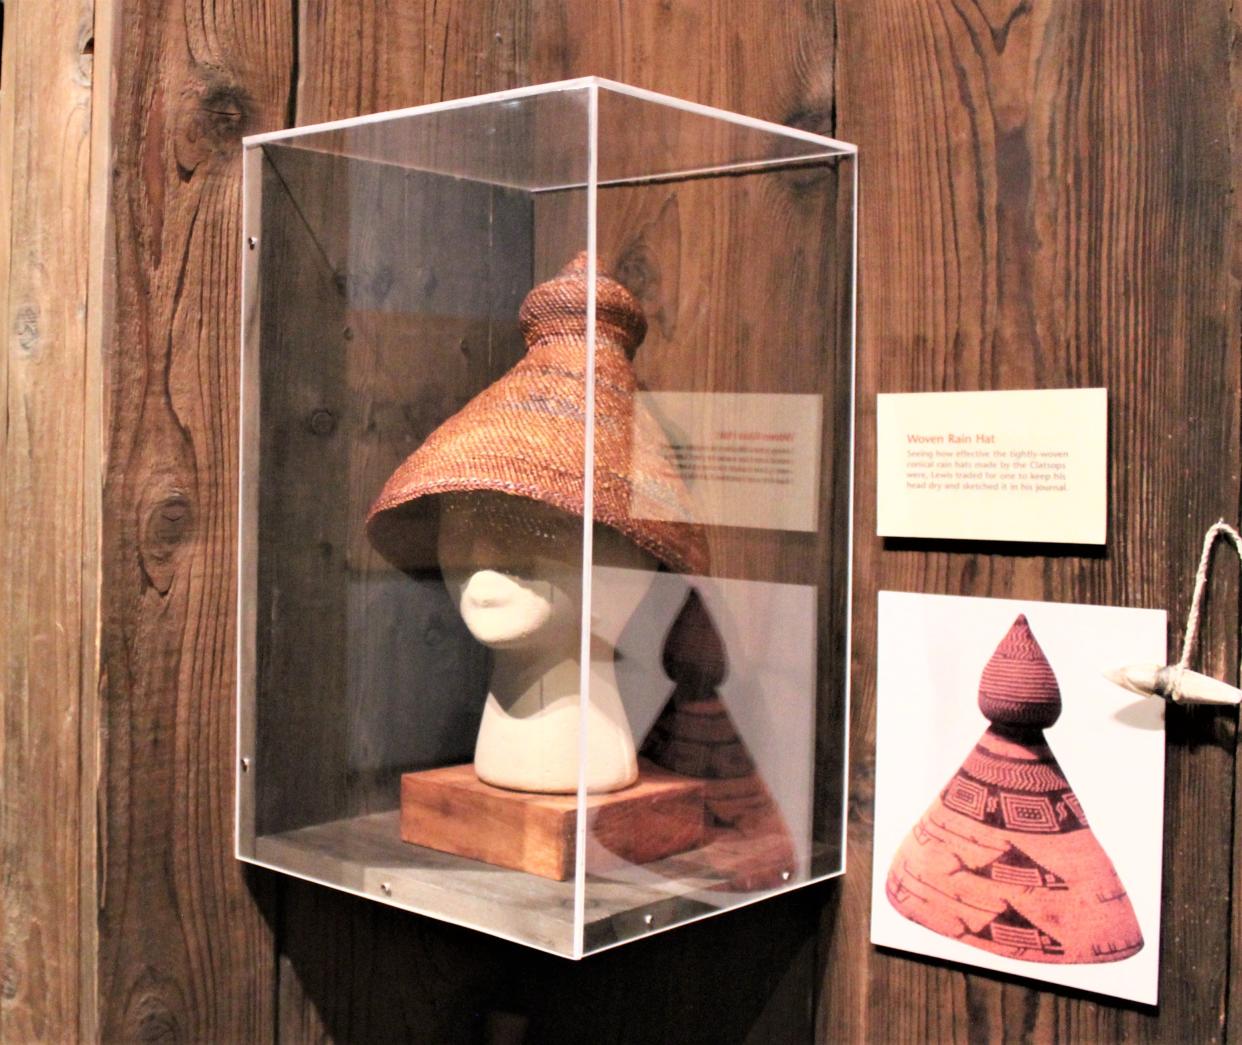 A conical hat once used by the Chinook Indians of the Pacific Northwest to protect themselves from the rain